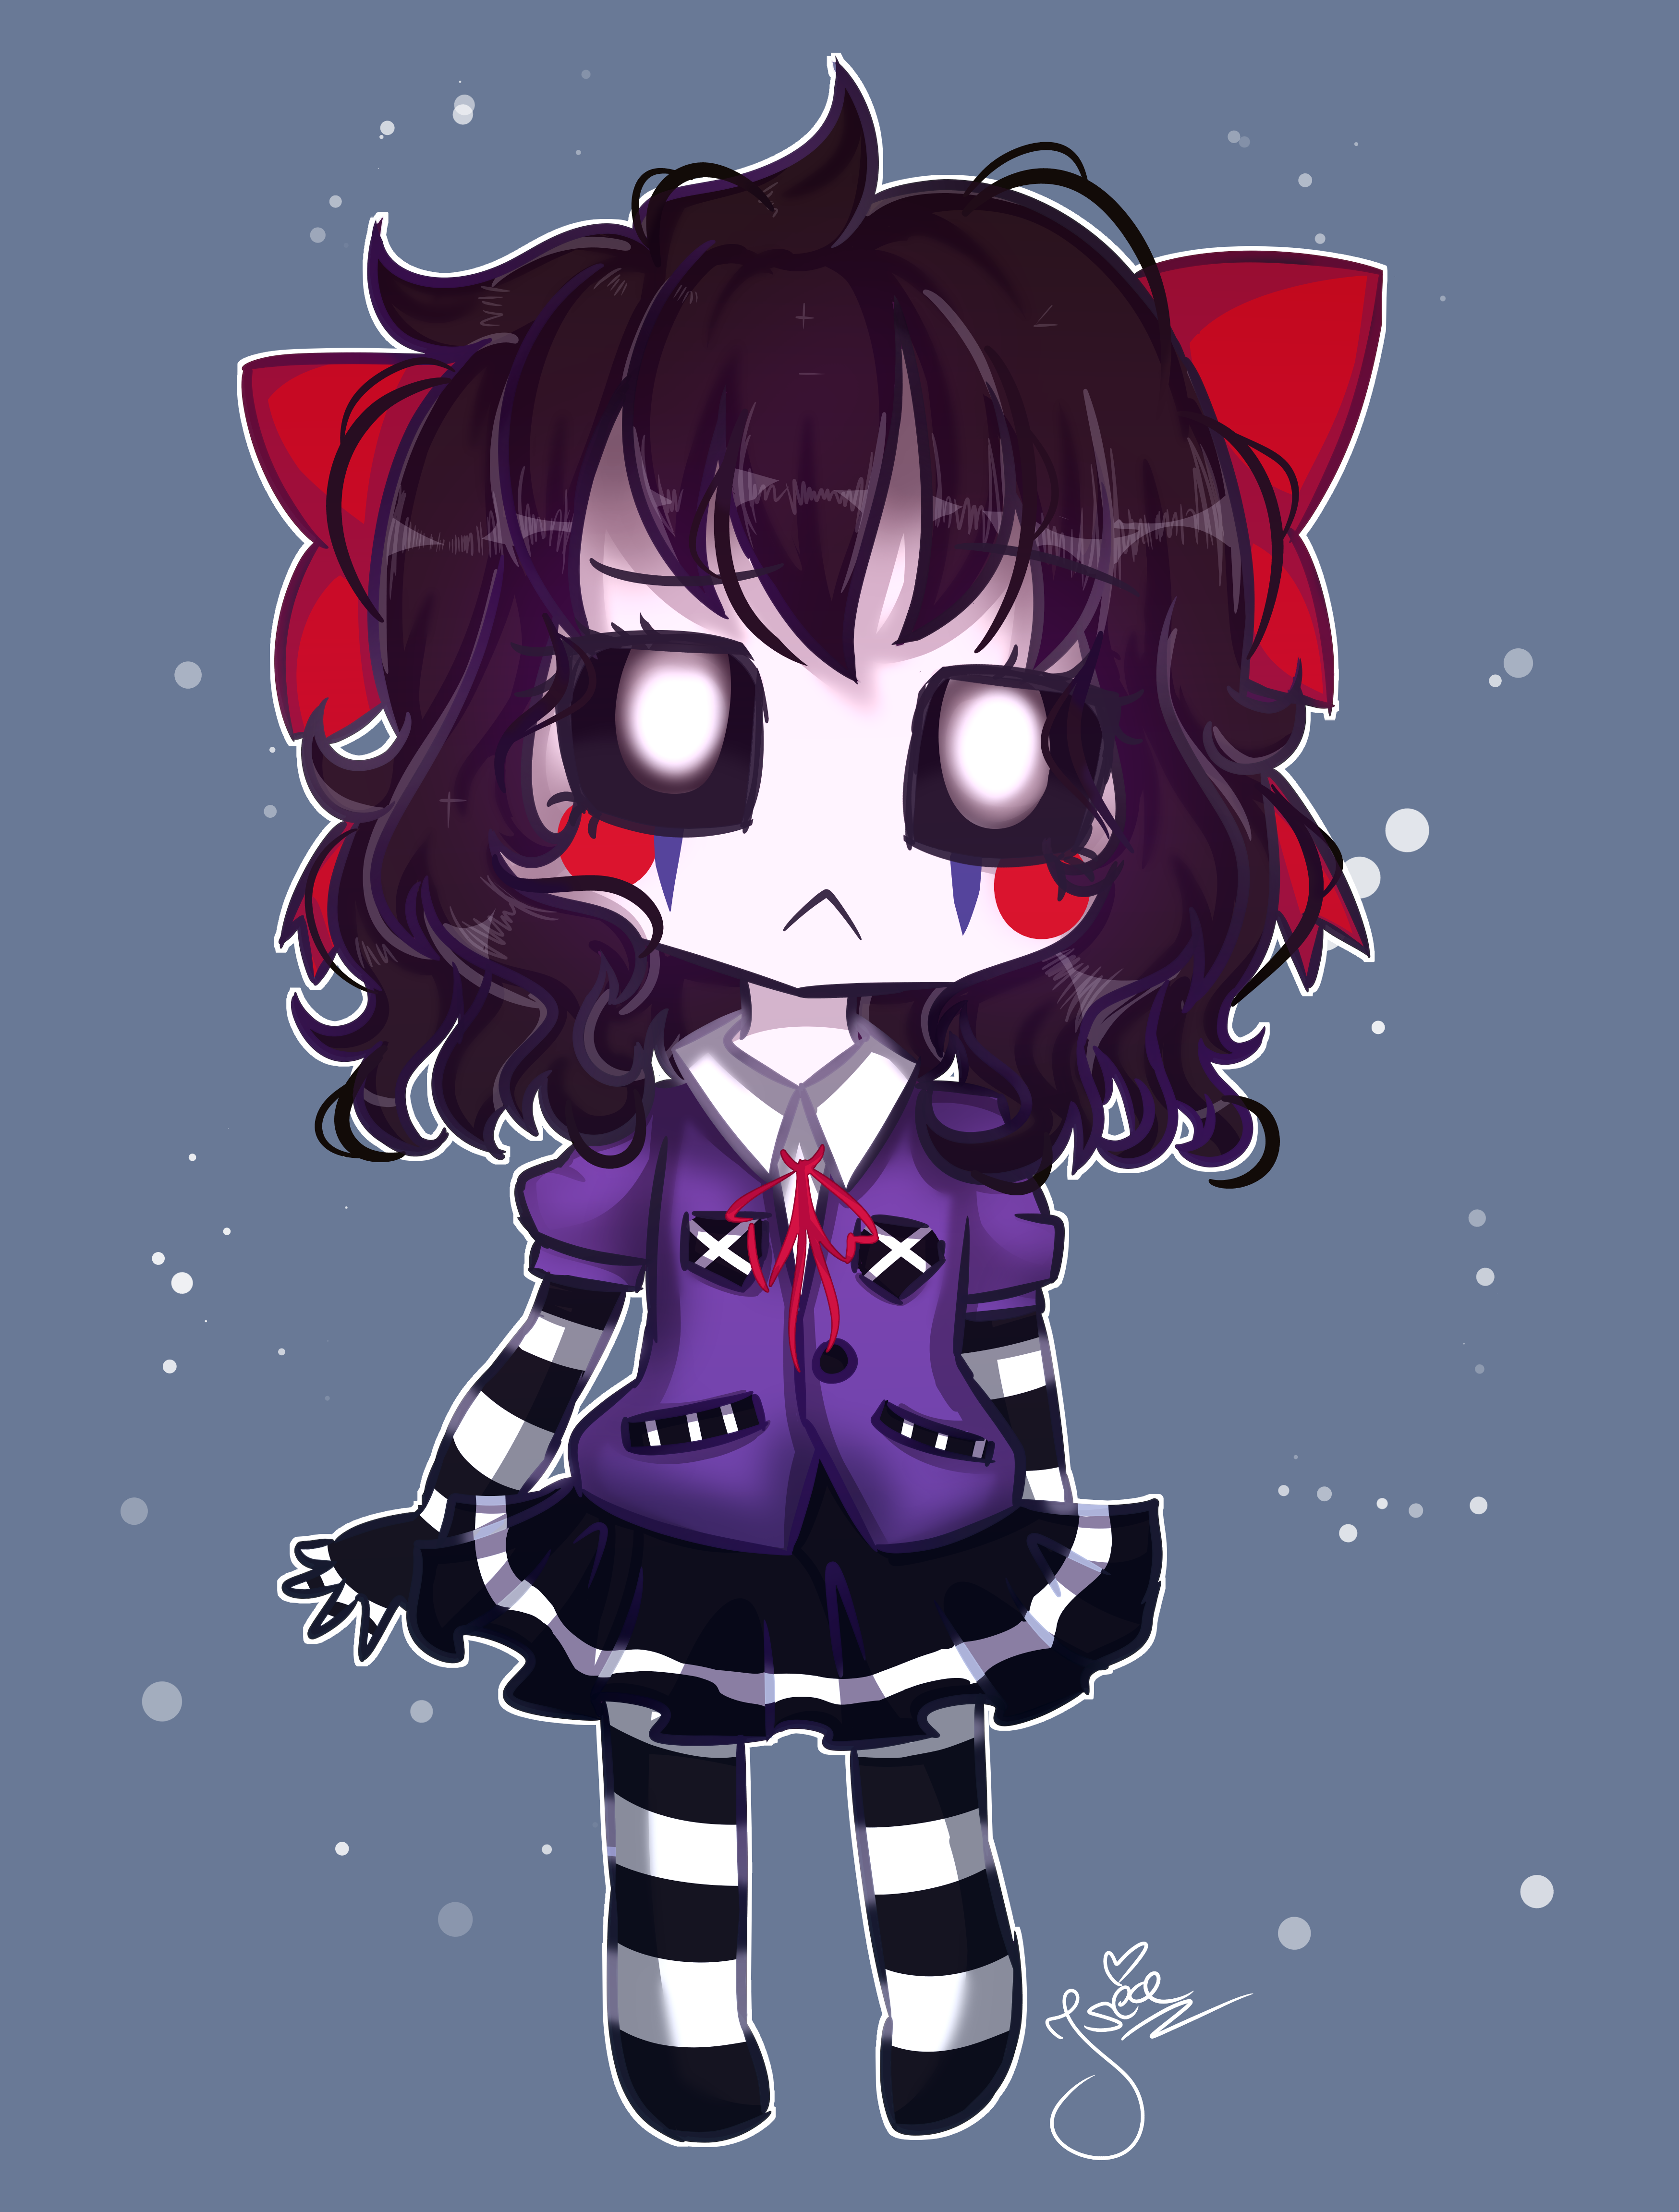 A cute chibi anime girl version of the Puppet, Five Nights at Freddy's